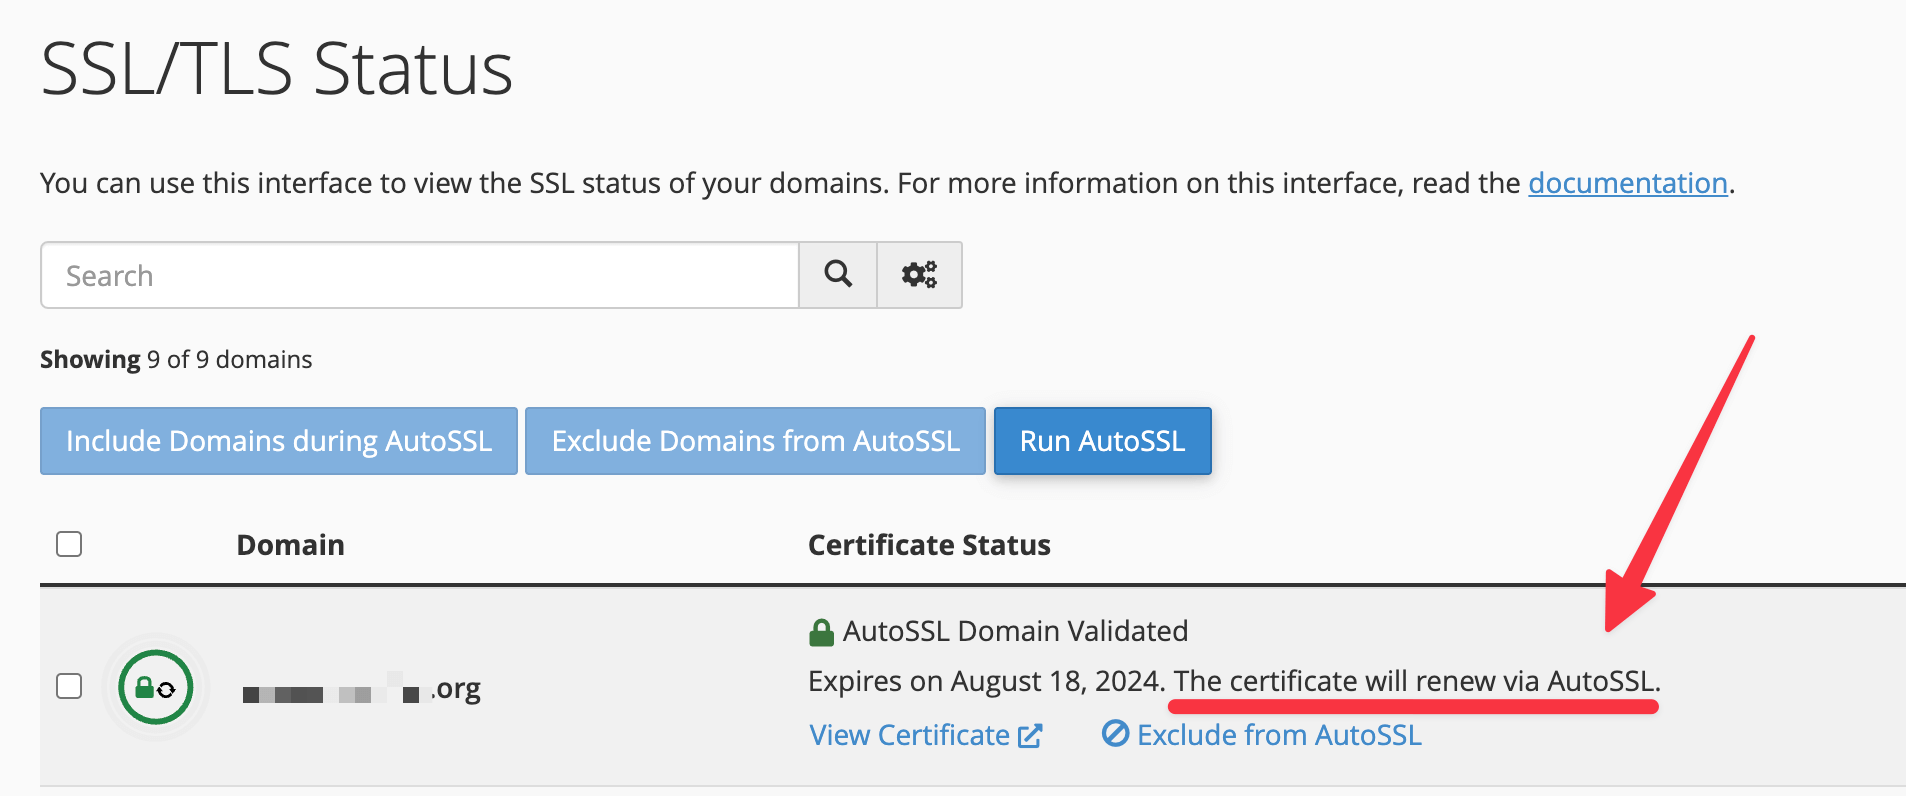 your certificate will renew automatically if you see this